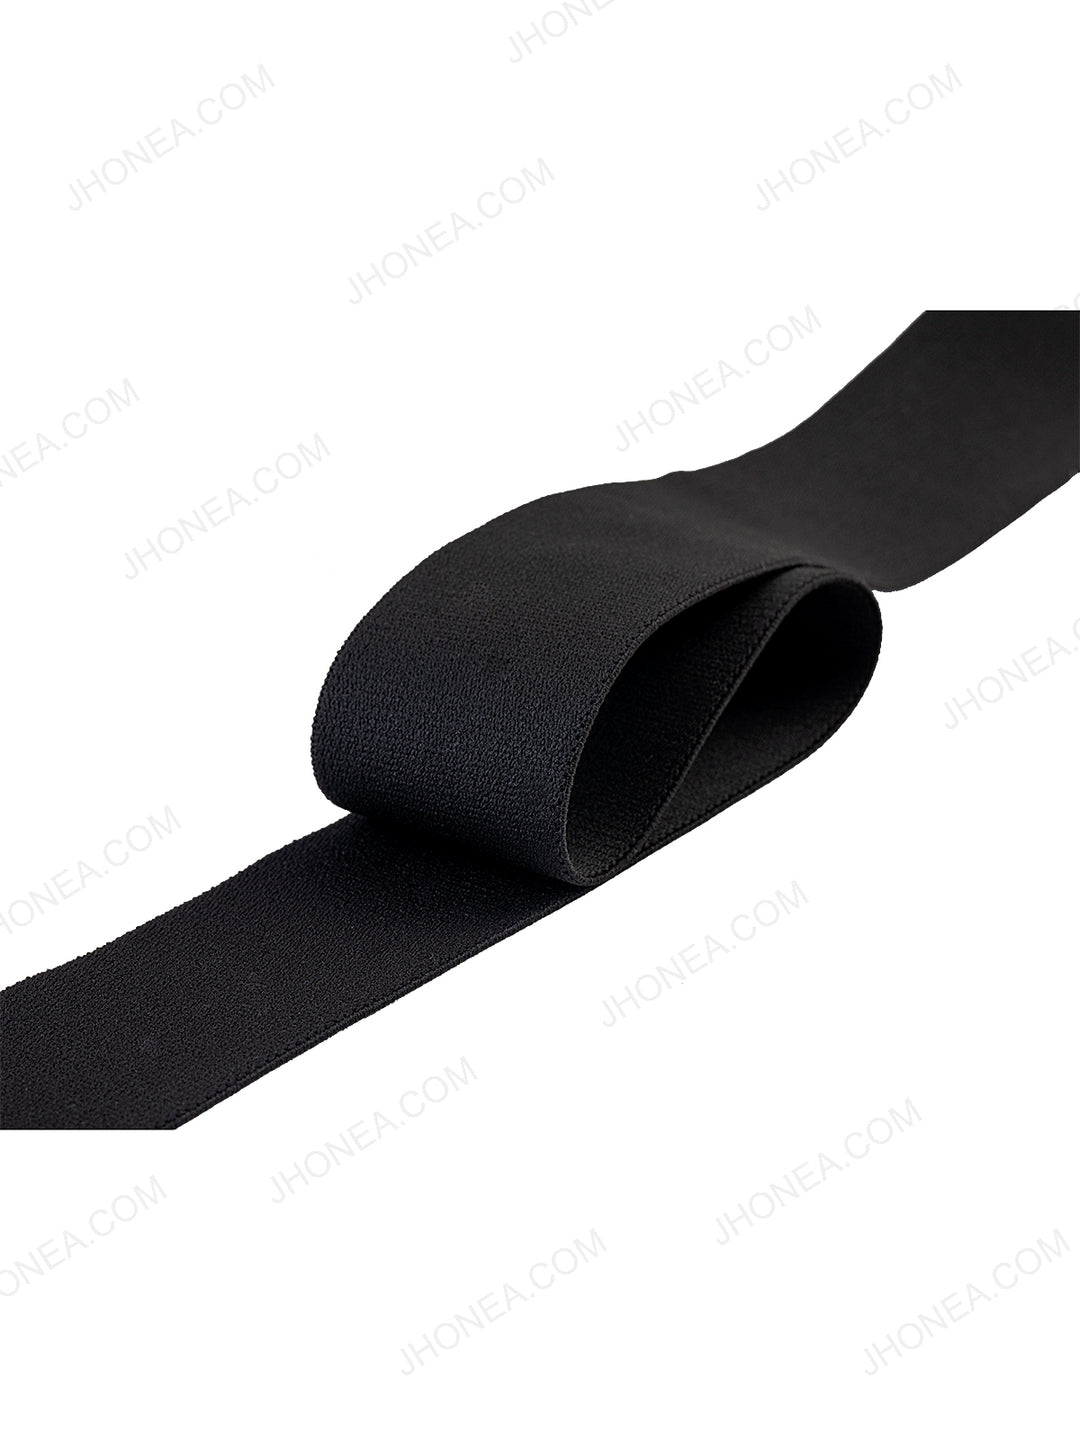 3 (75mm) wide White and Black Comfortable Plush Elastic,Waistband